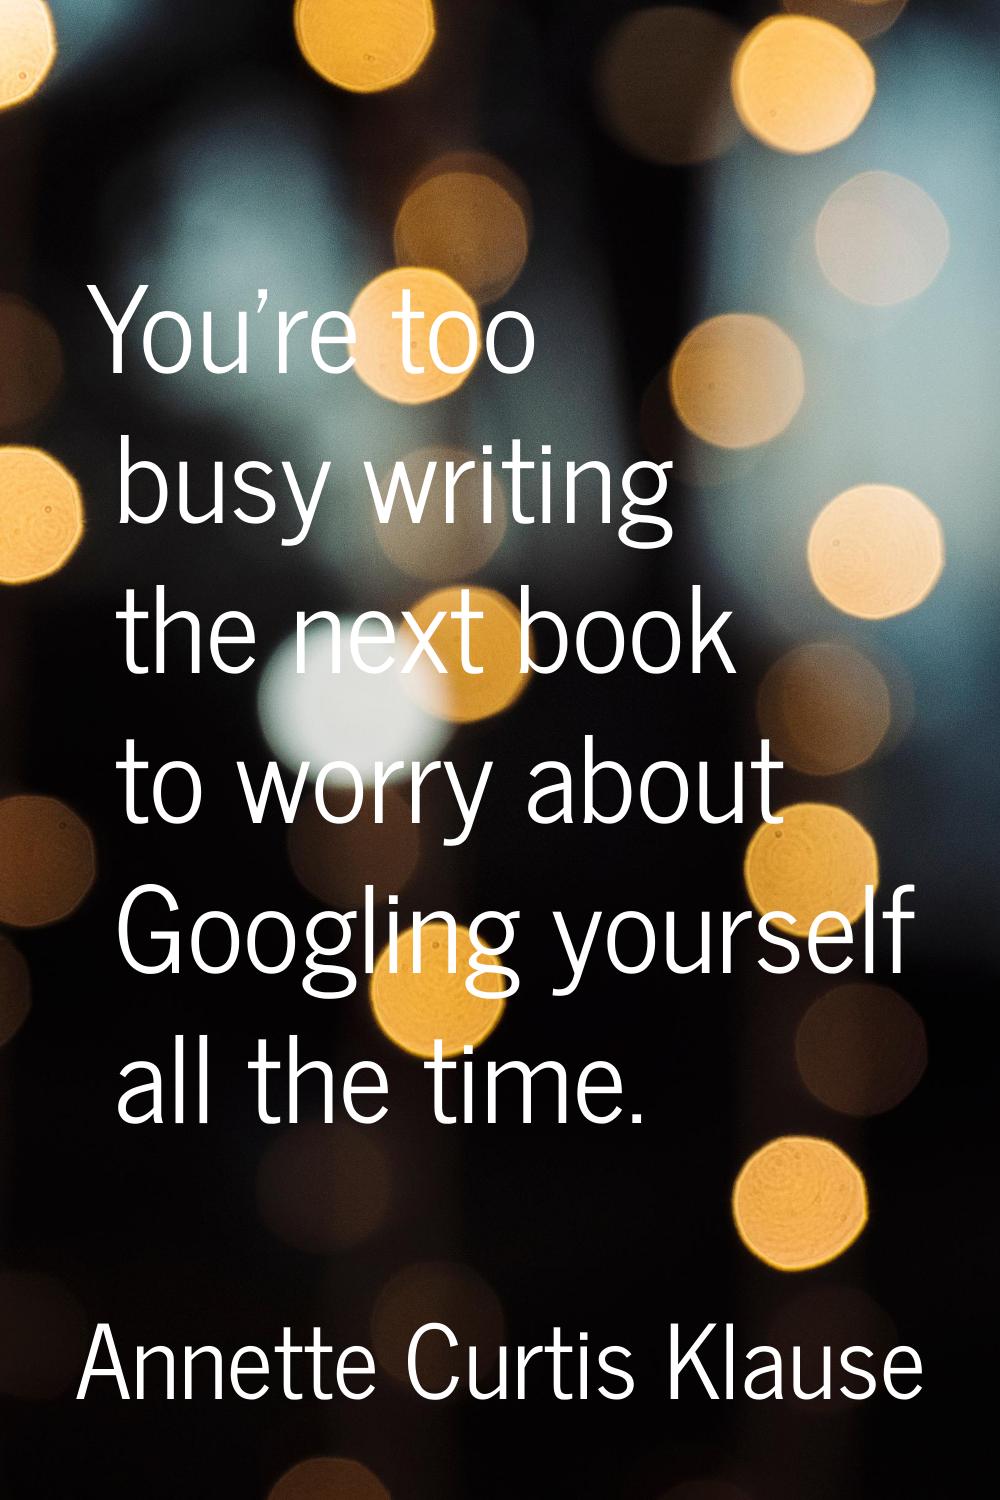 You're too busy writing the next book to worry about Googling yourself all the time.